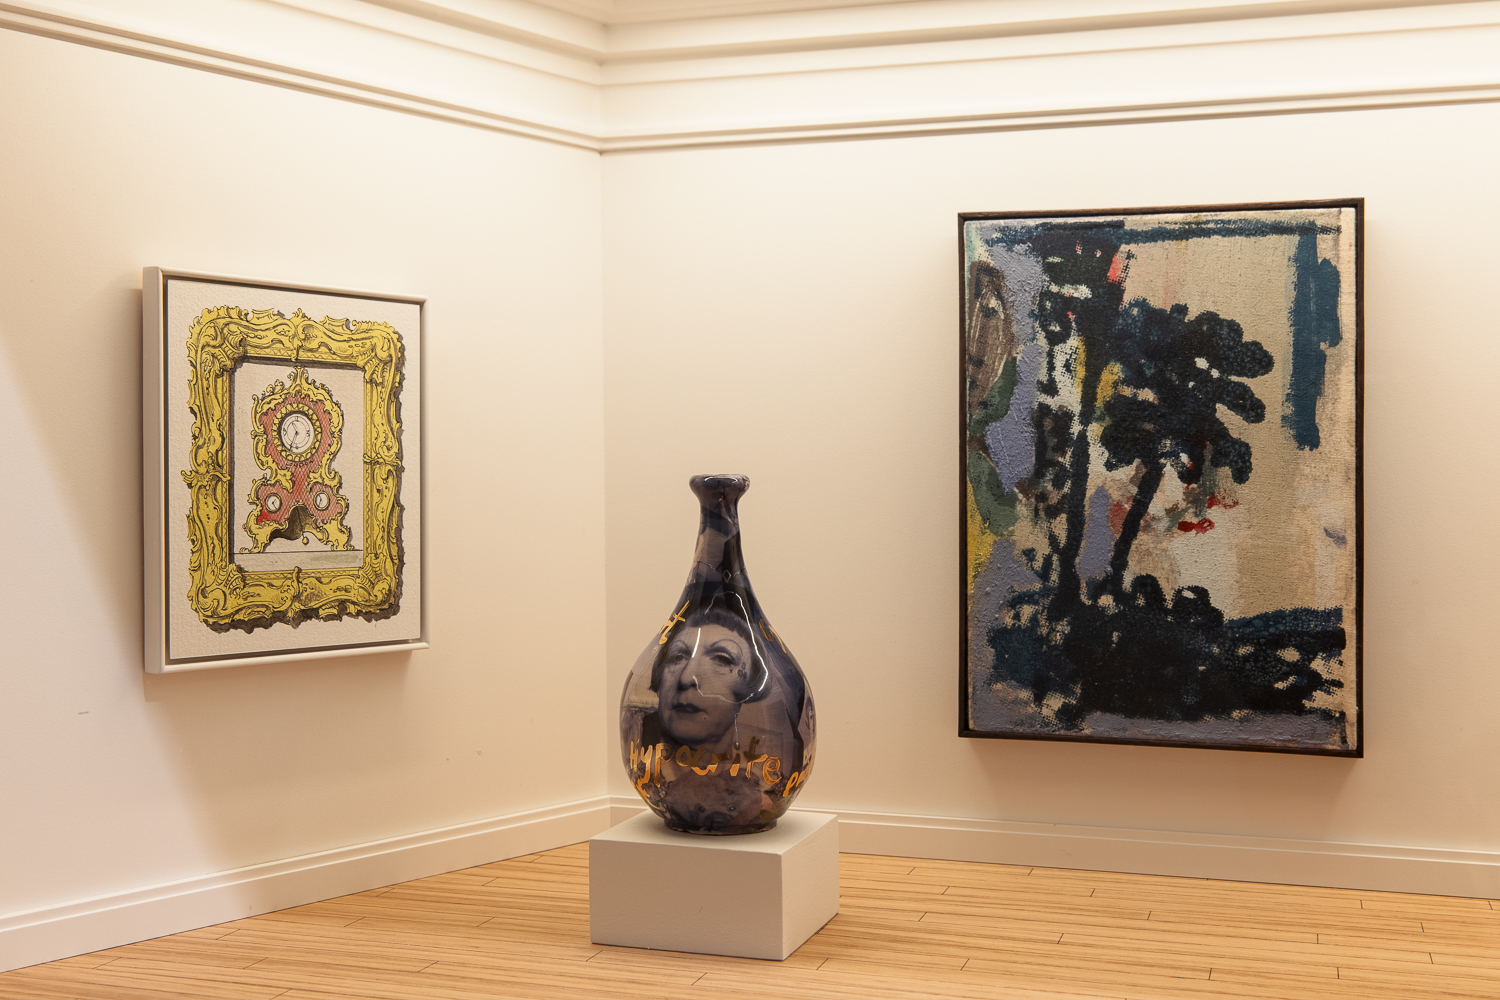 Three works of art in a gallery with white walls and wooden flooring. On the left hand wall is a painting of a baroque clock with an ornate frame. On the right hand wall is an abstract painting in tones of blue, green and white. On a plinth in front of them is a ceramic bottle vase with a picture of the artist Grayson Perry with gold writing.